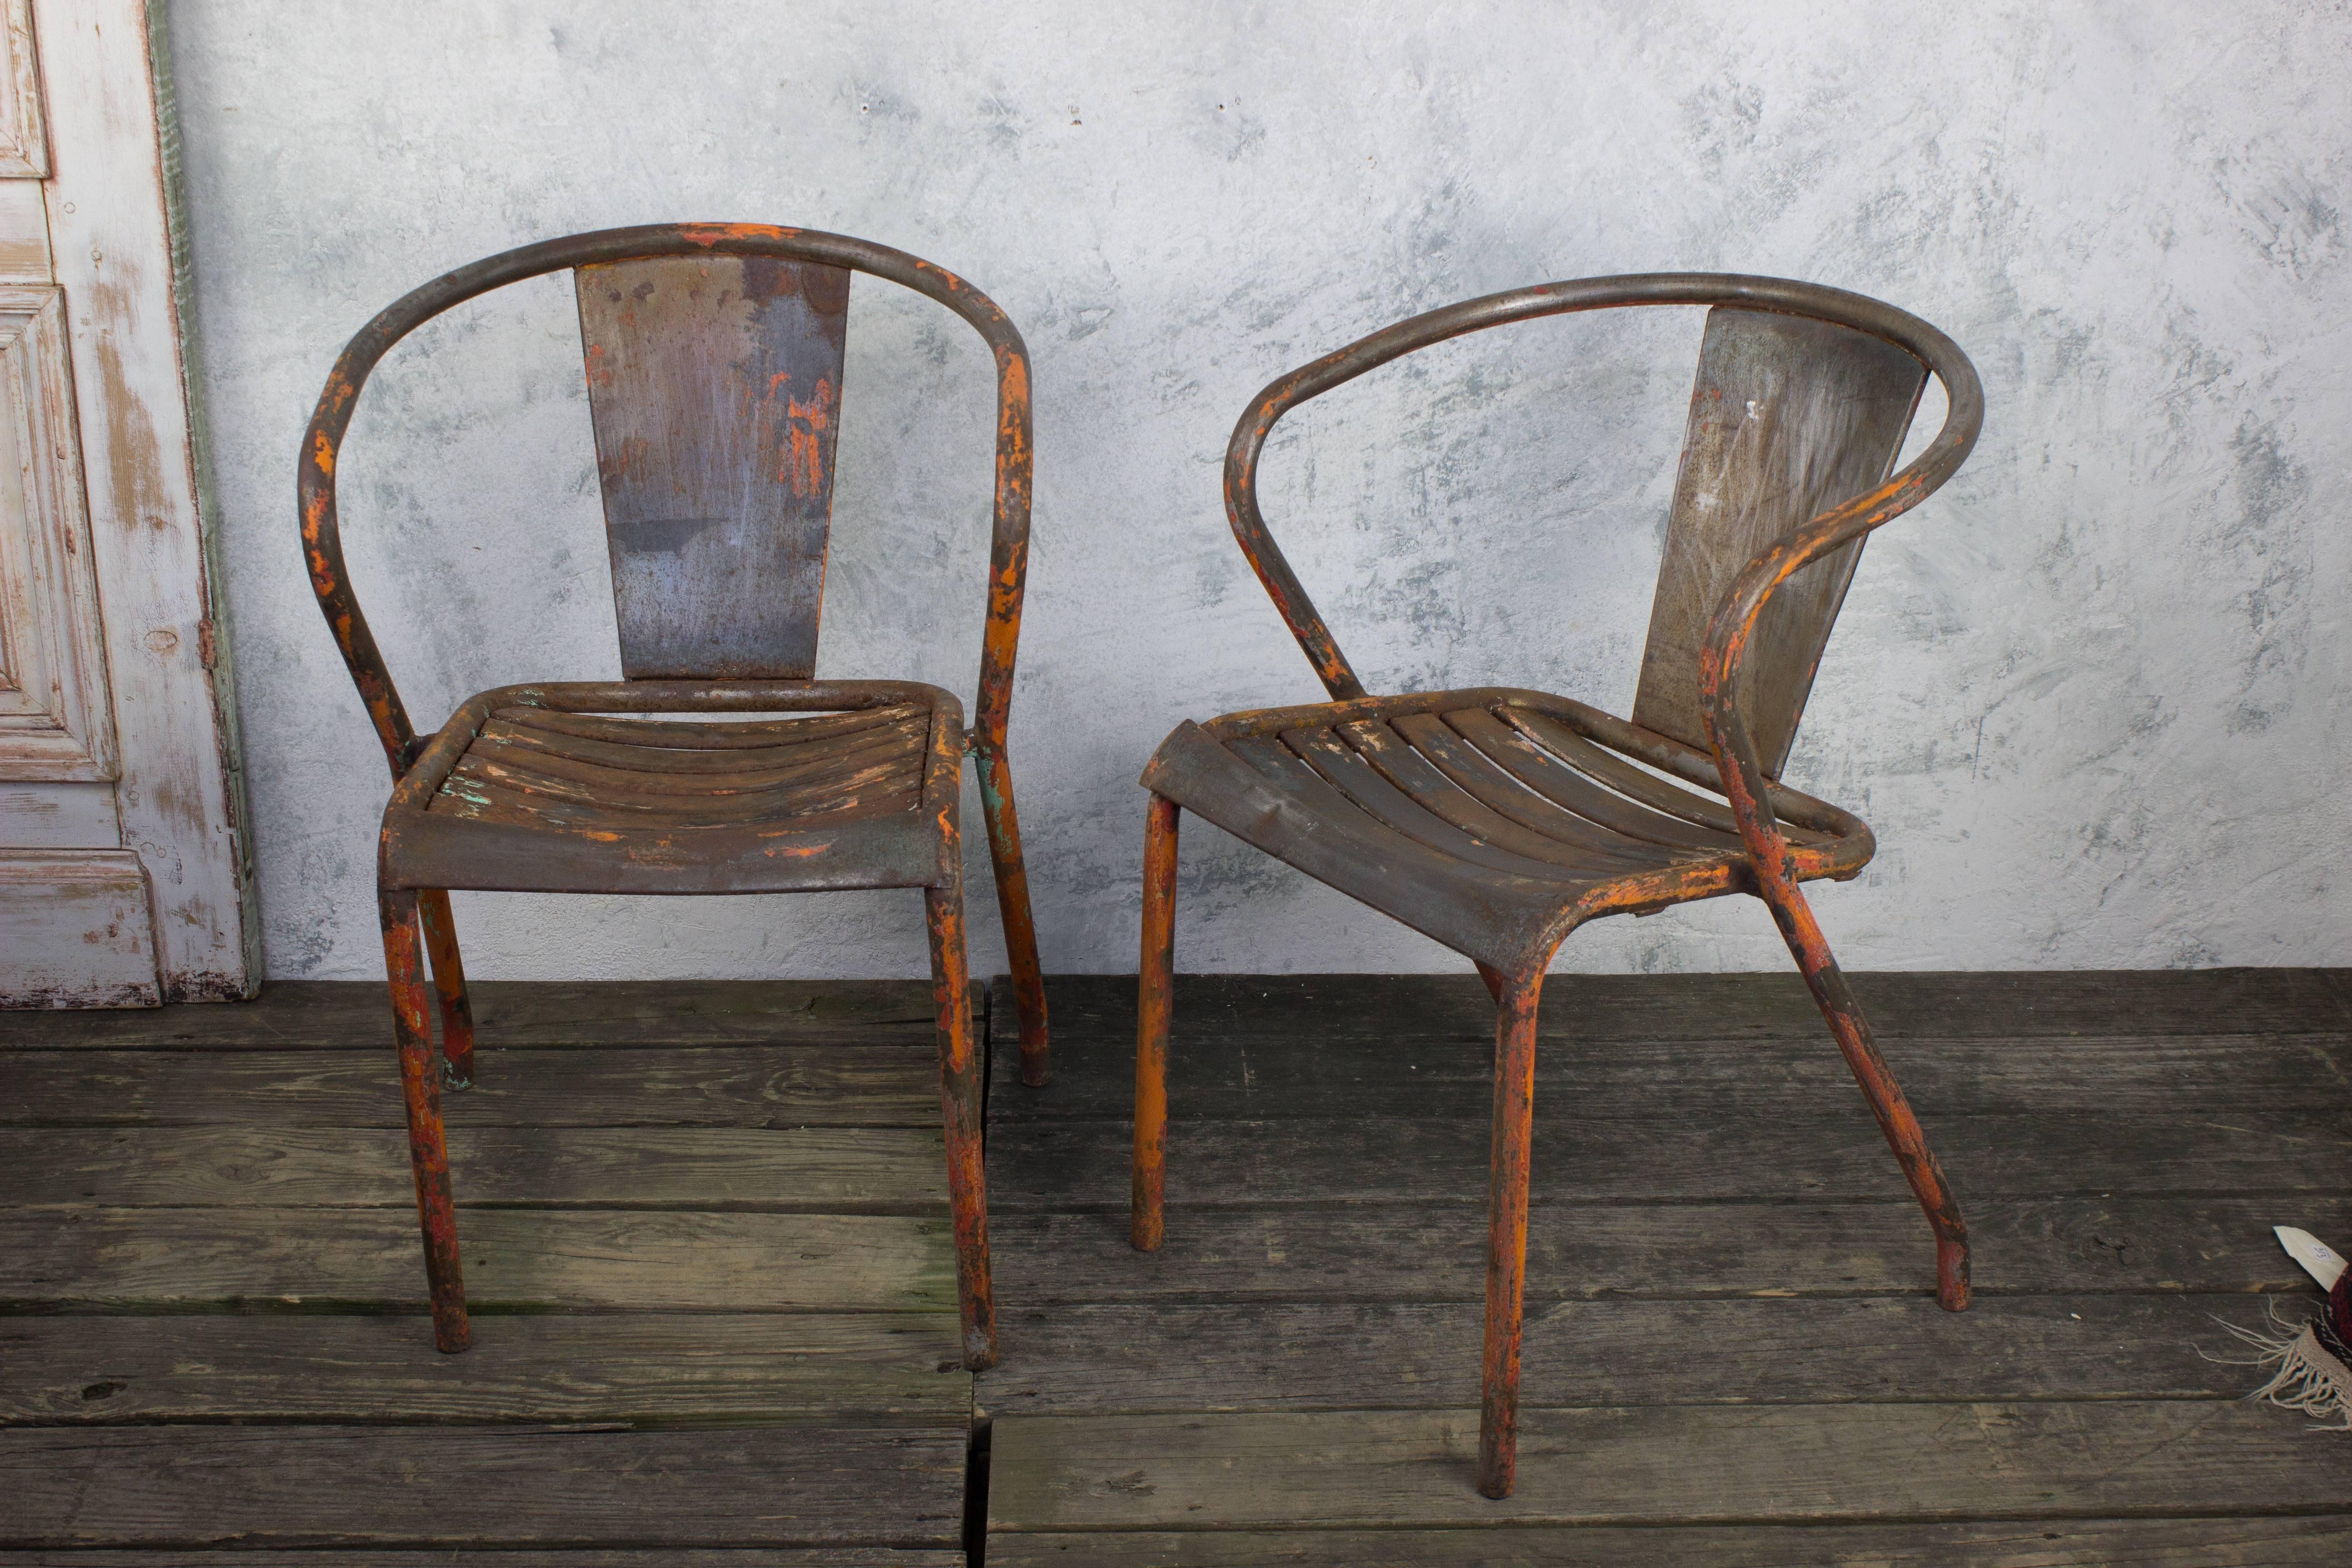 Pair of French Tolix Industrial Chairs with Distressed Orange Paint Finish 2